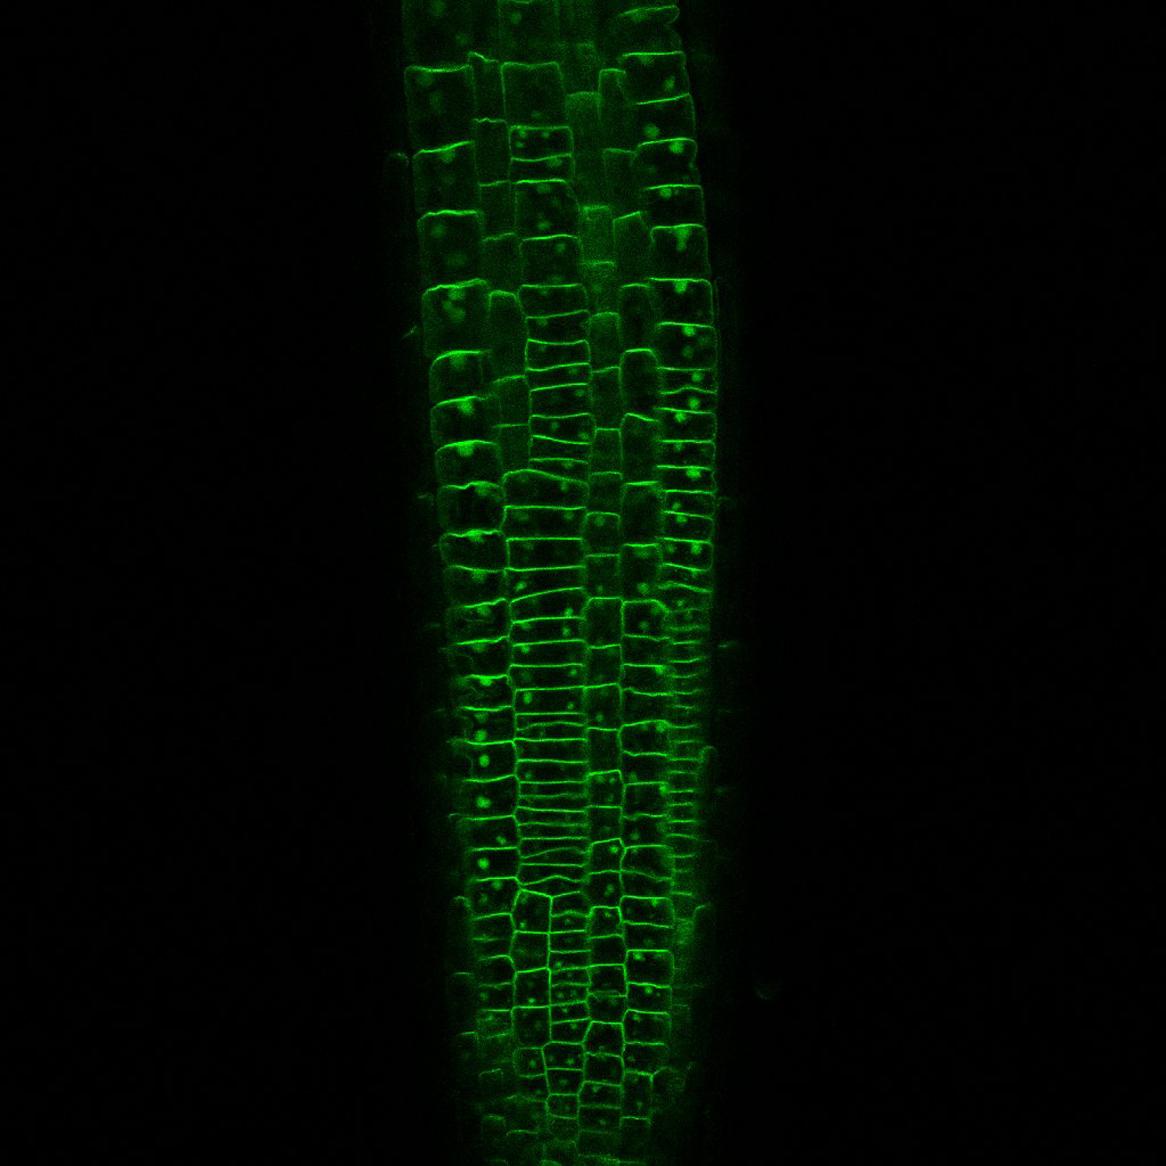 PIN2 auxin transport protein that is internalised (green dots) by strigolactone treatment to epidermal root cells of Arabidopsis thaliana. Image by Philip Brewer.